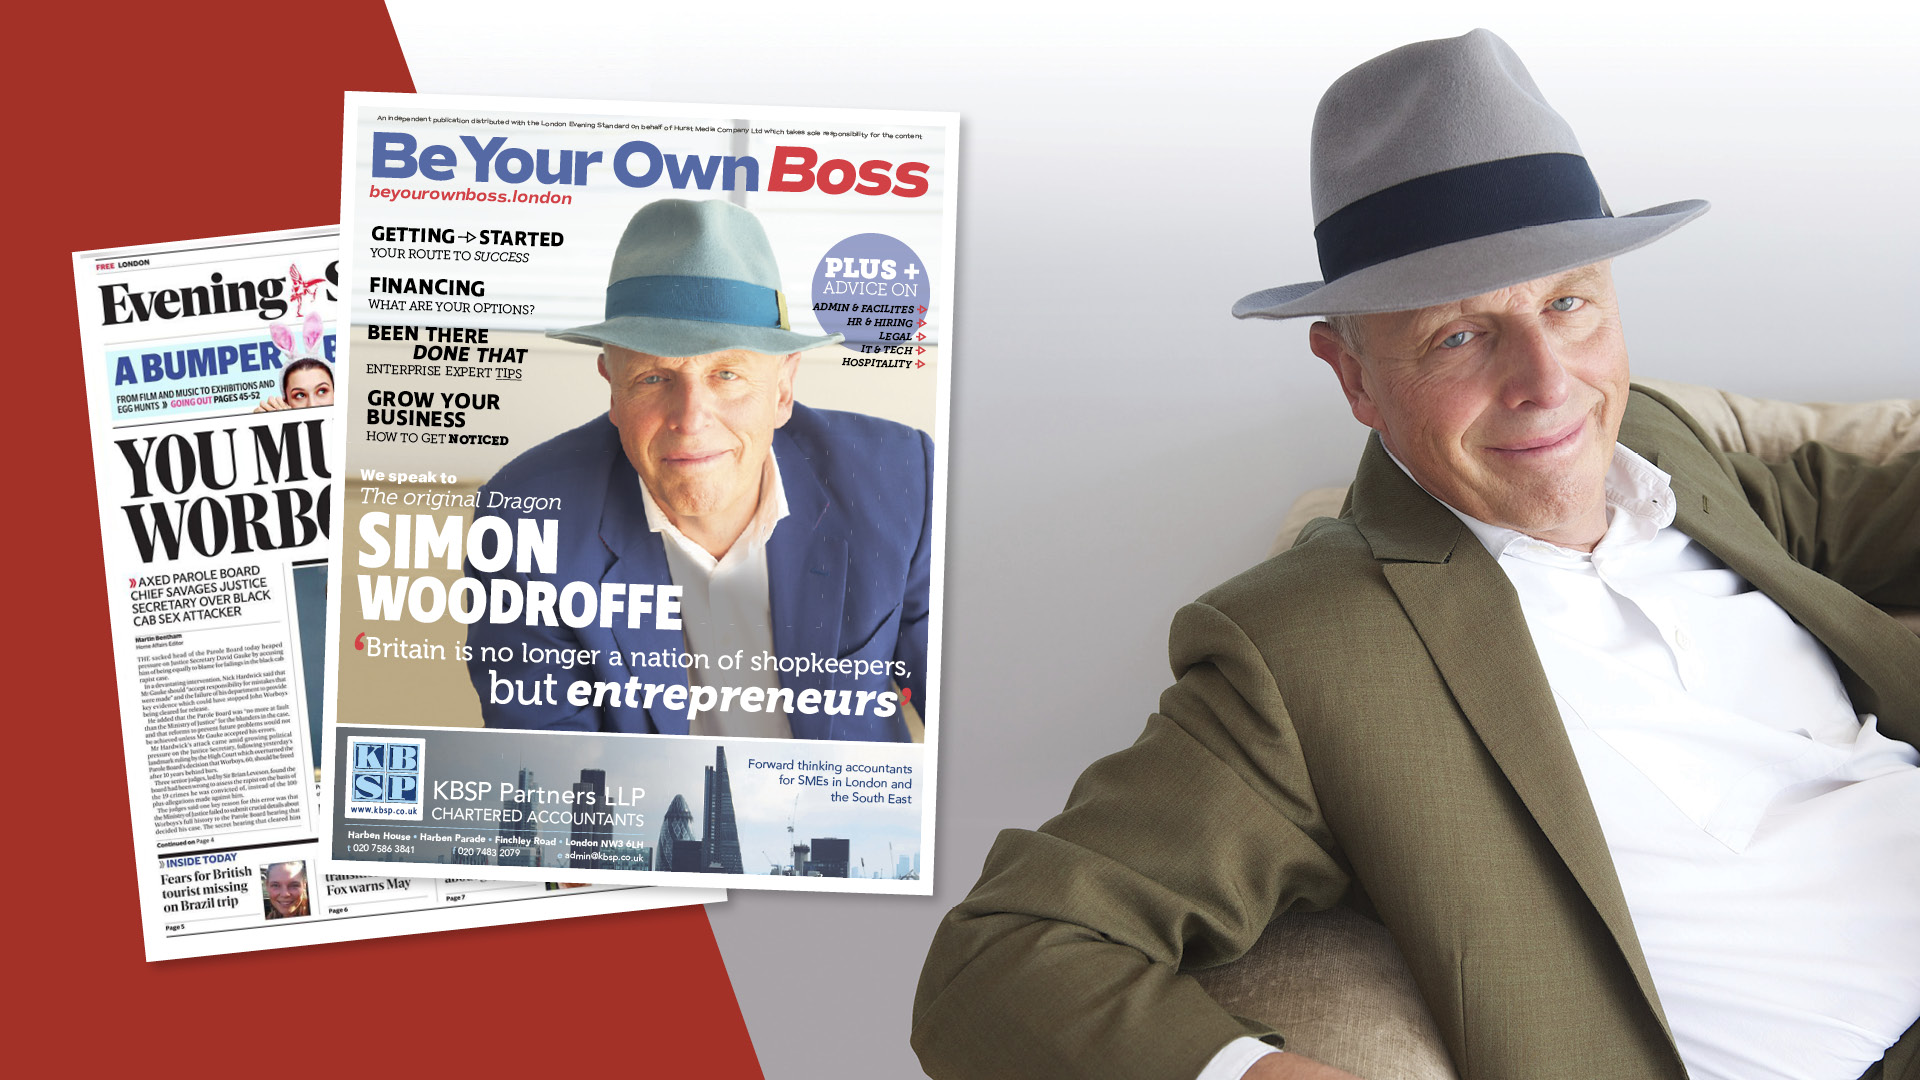 Be Your Own Boss distributed with the Evening Standard